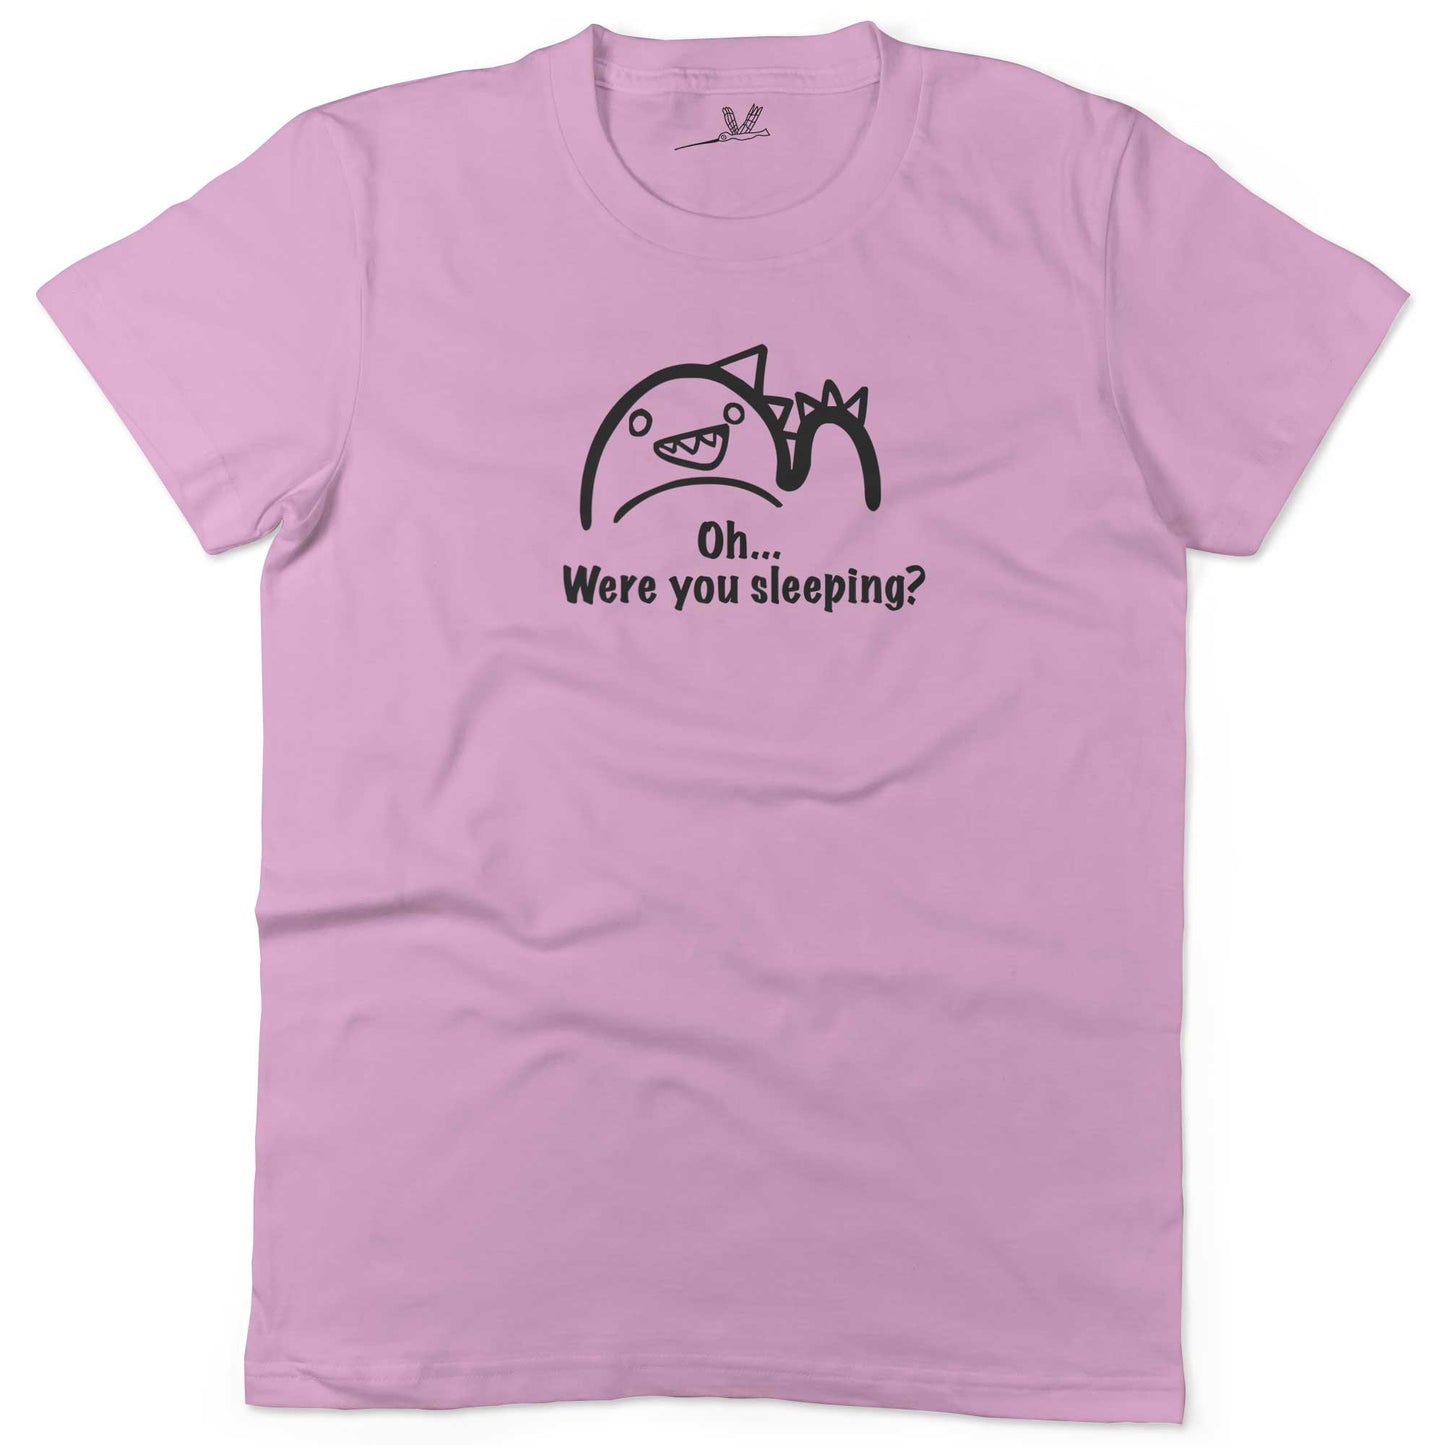 Oh...Were you sleeping? Women's or Unisex Funny T-shirt-Pink-Woman